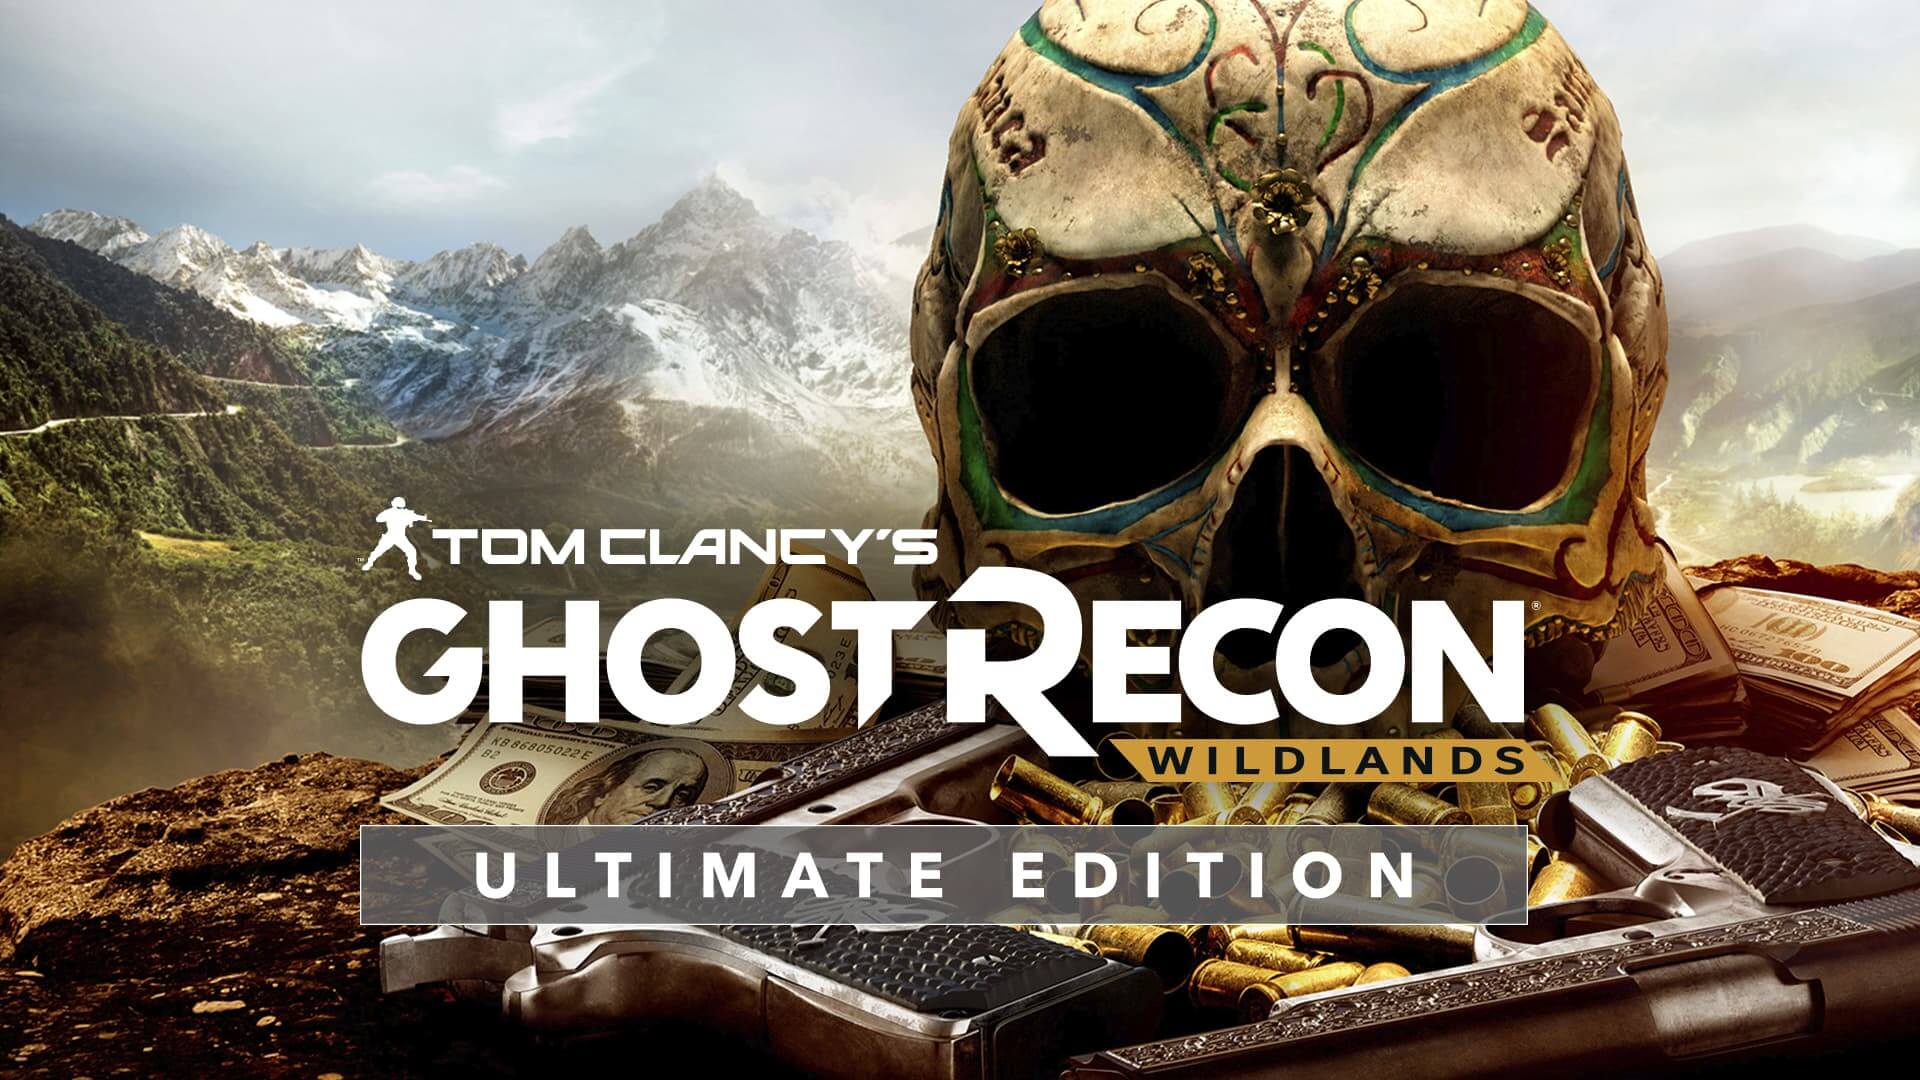 Tom Clancy’s Ghost Recon: Wildlands – Ultimate Edition Full Repack